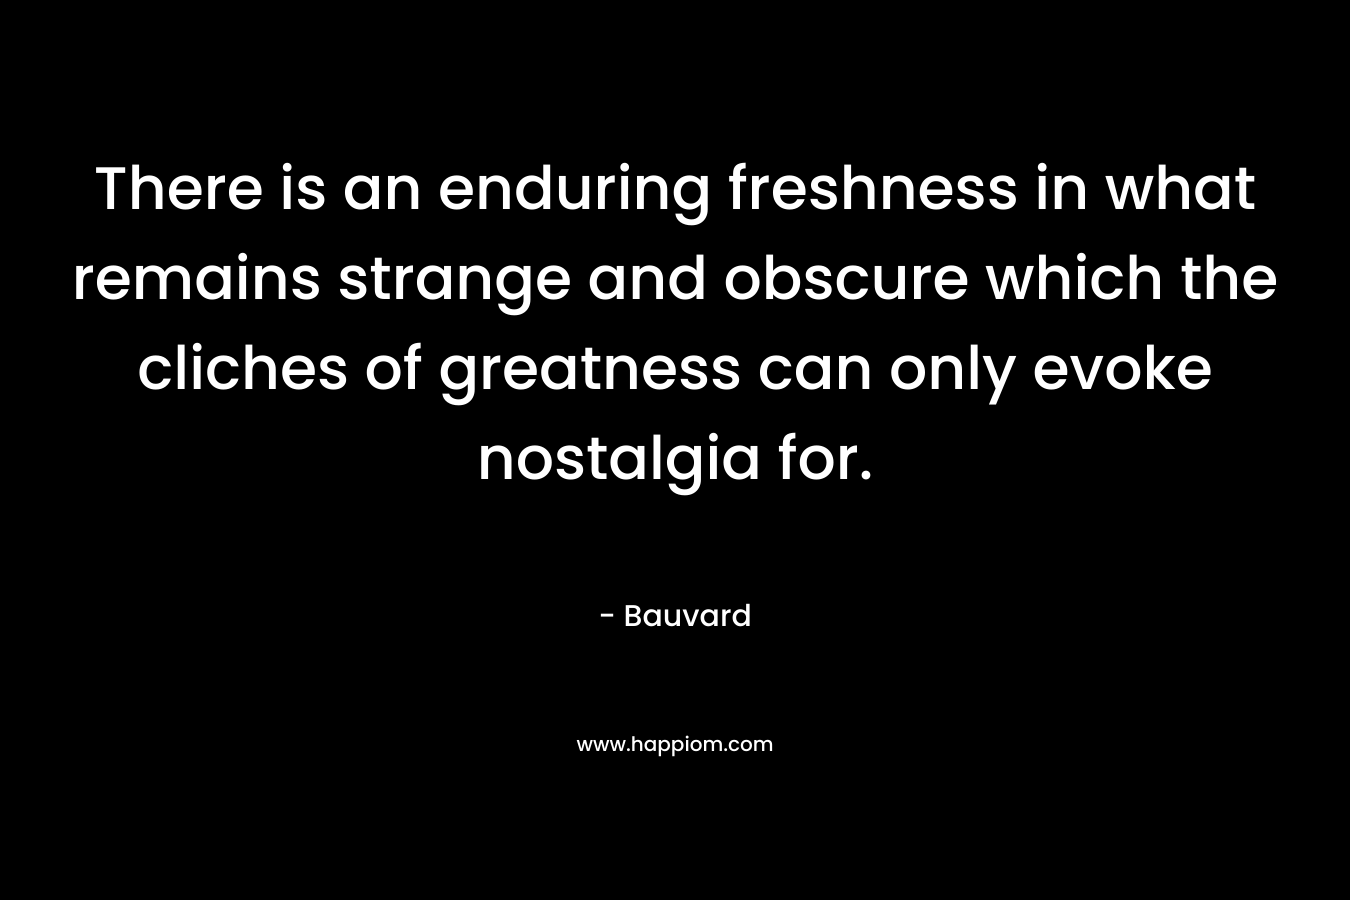 There is an enduring freshness in what remains strange and obscure which the cliches of greatness can only evoke nostalgia for. – Bauvard